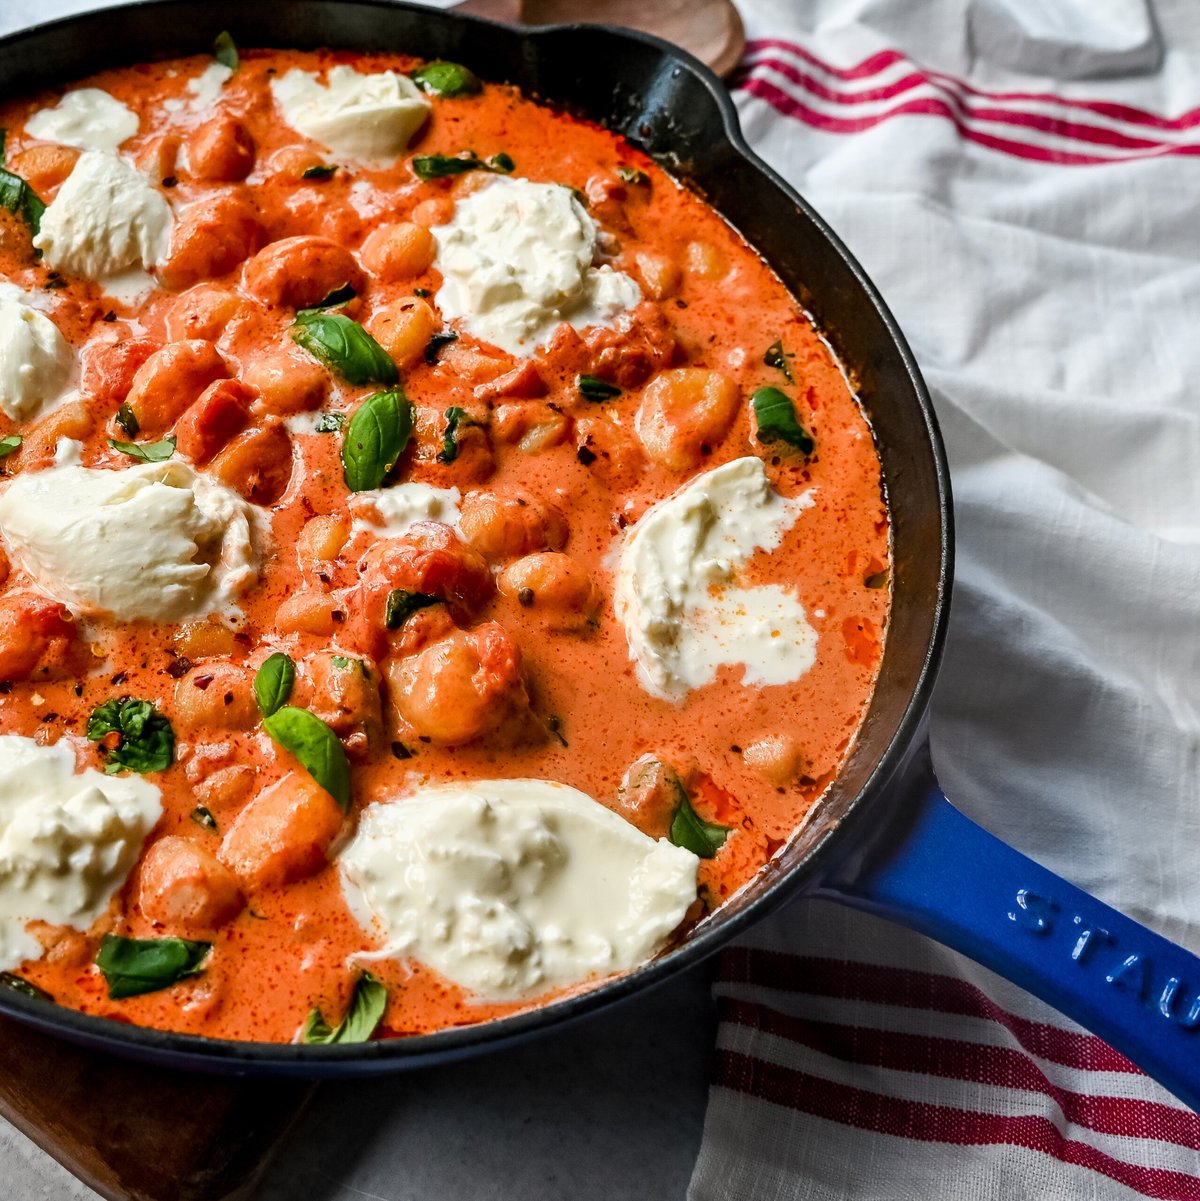 Creamy Tomato Gnocchi with Burrata. This easy 20-minute Creamy Tomato Gnocchi is made with a vibrant tomato garlic sauce tossed with cream, fresh basil, and gnocchi and topped with fresh burrata cheese. A simple, quick, and easy dinner full of flavor!